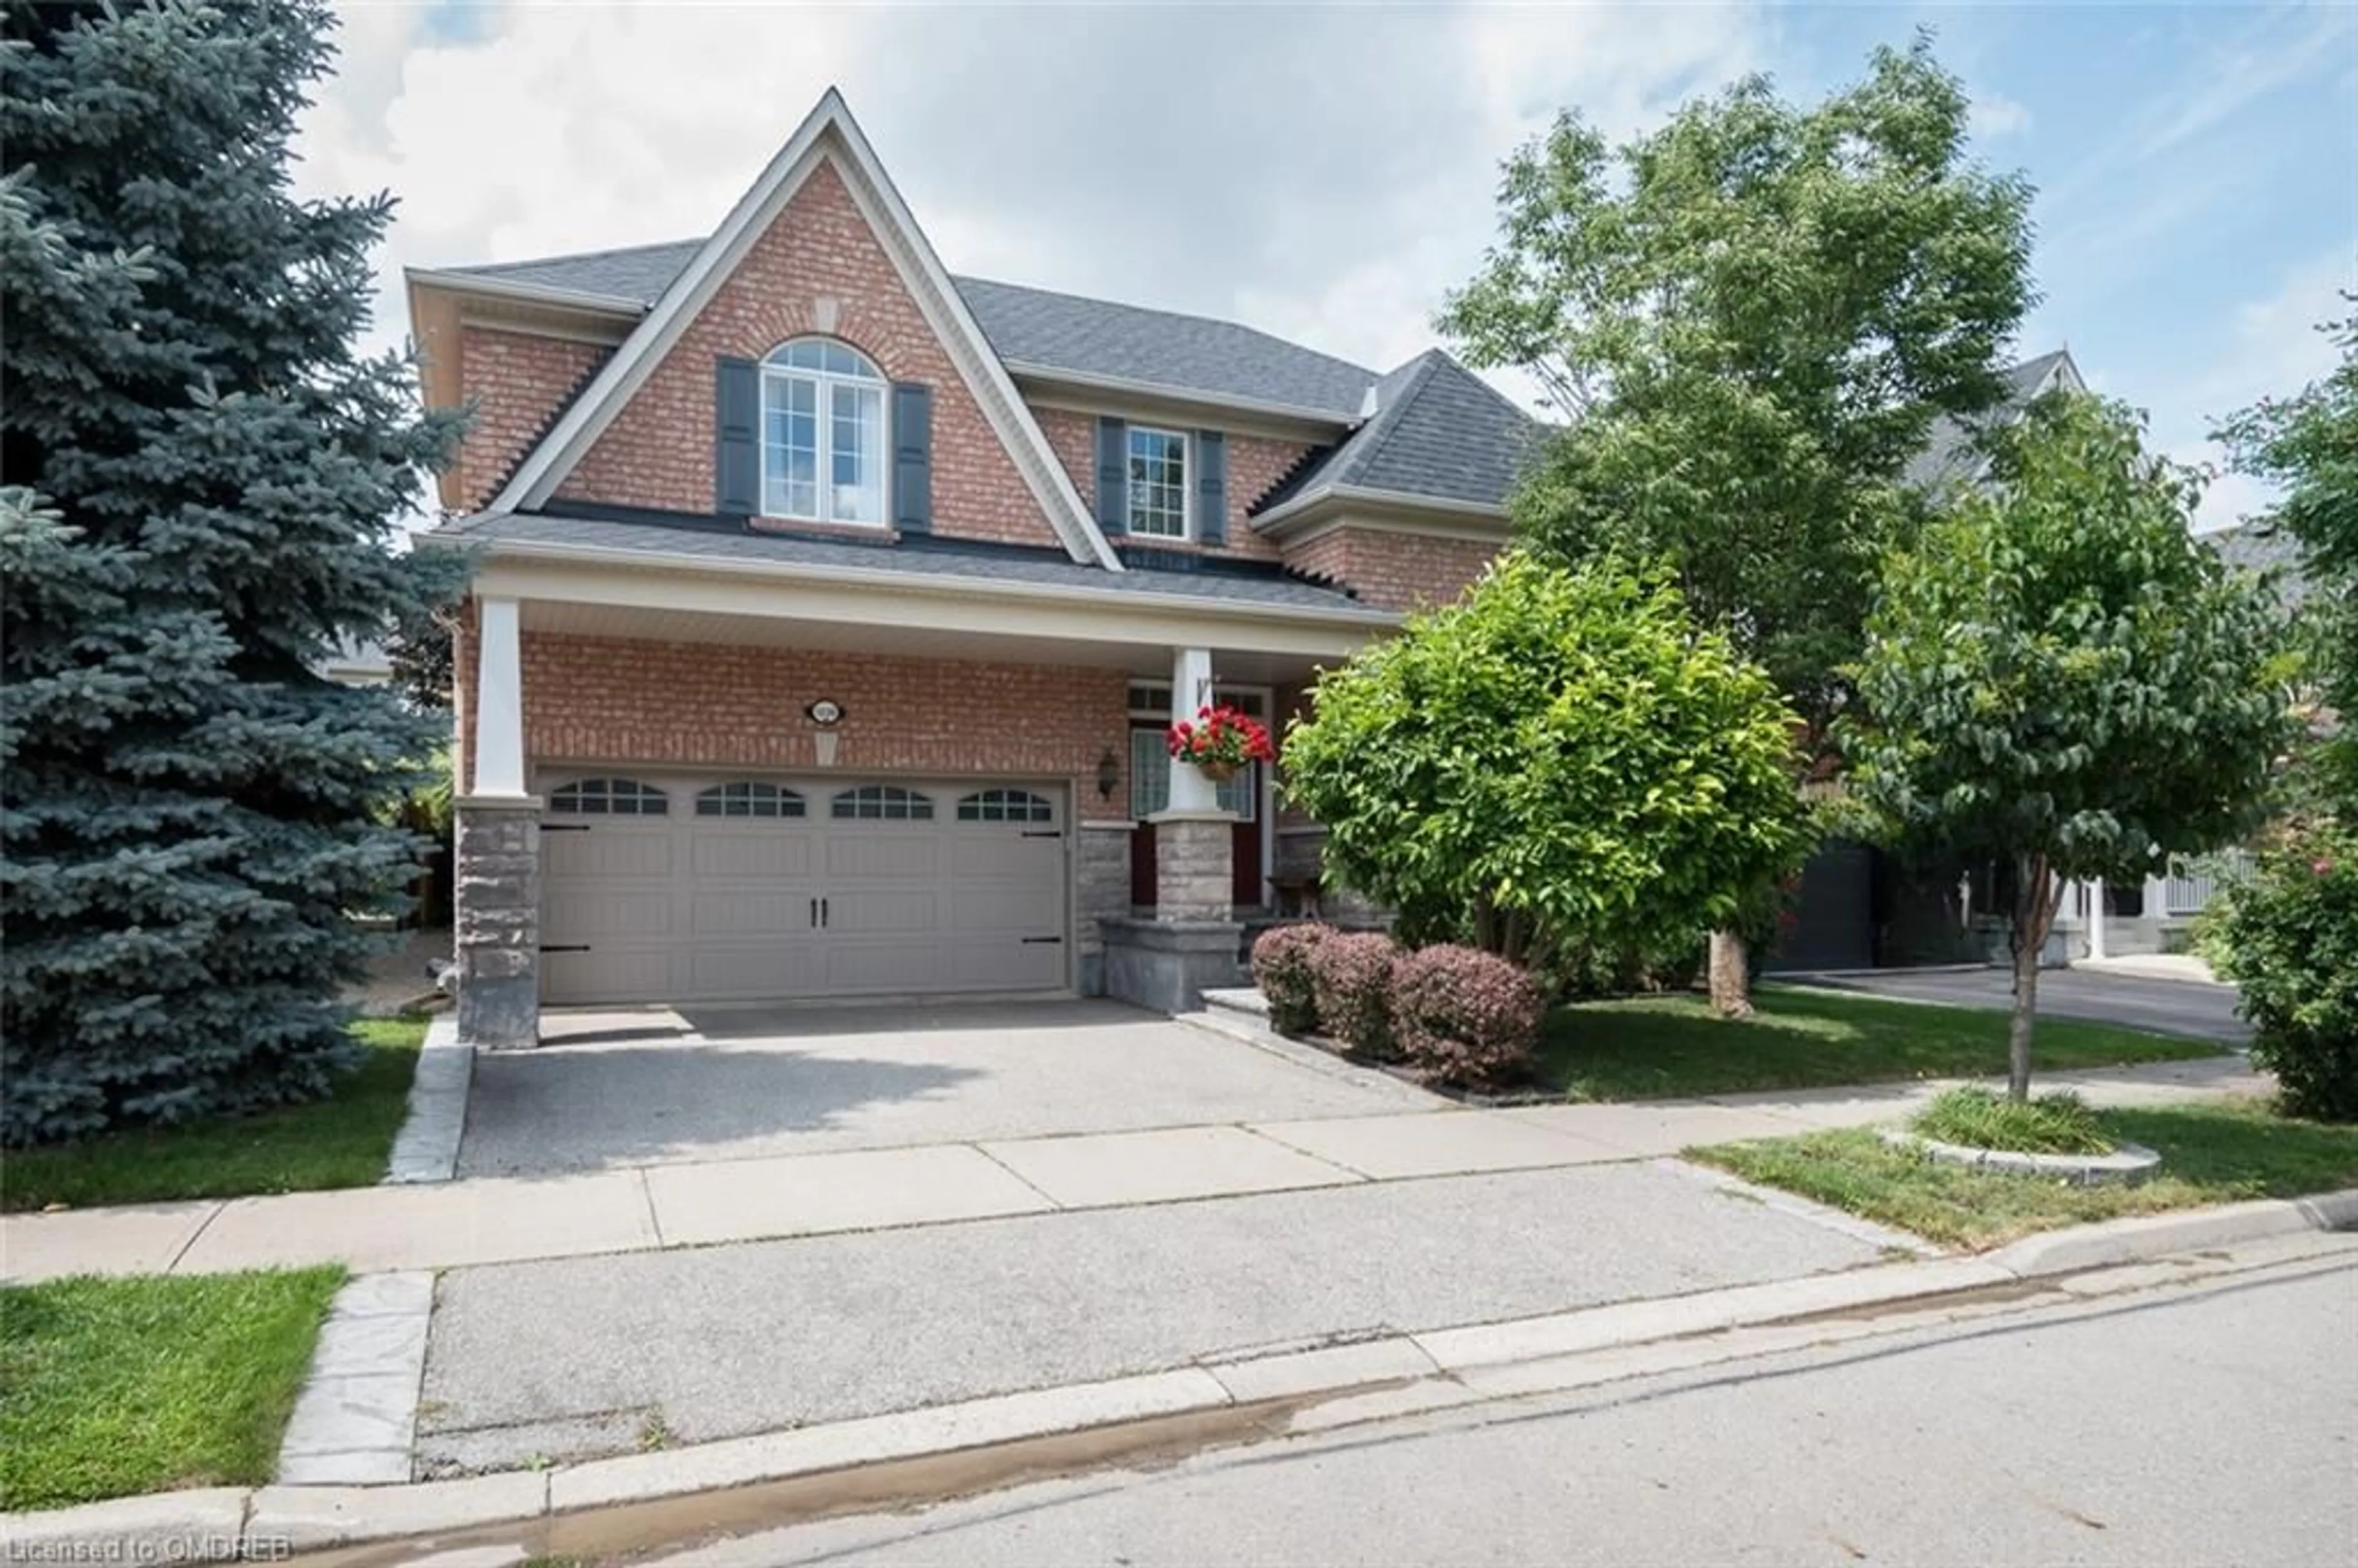 Home with brick exterior material for 1339 Marshall Cres, Milton Ontario L9T 6N4